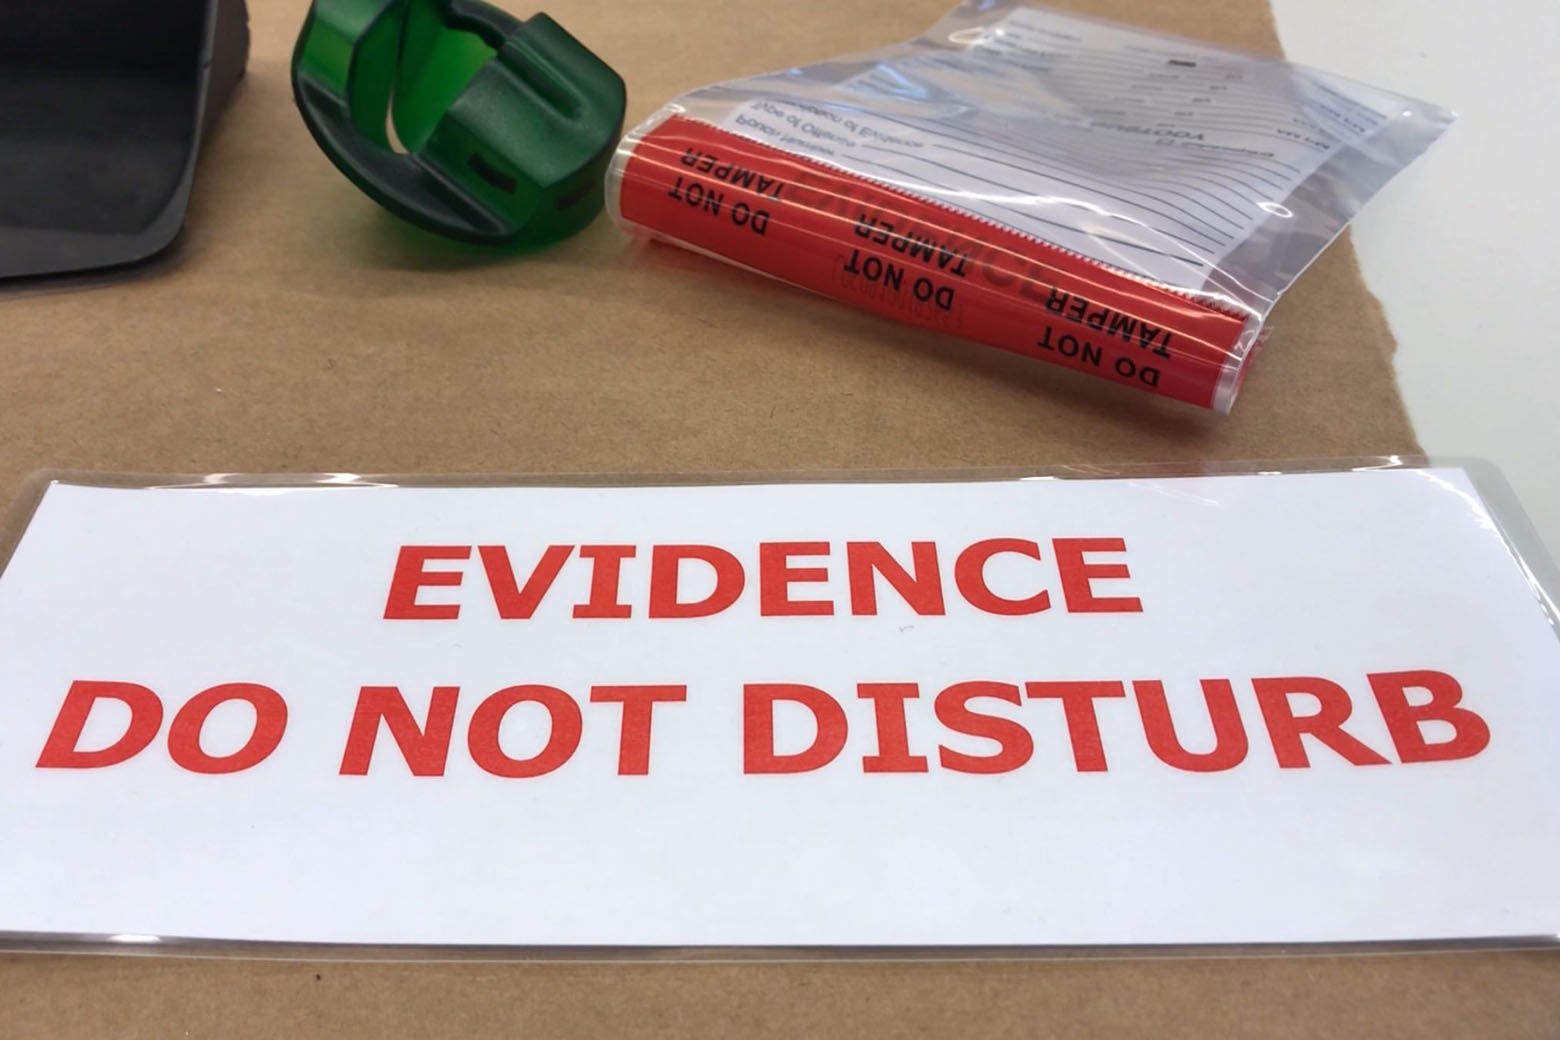 DC crime lab appears to regain partial accreditation after losing ability to process evidence – WTOP News